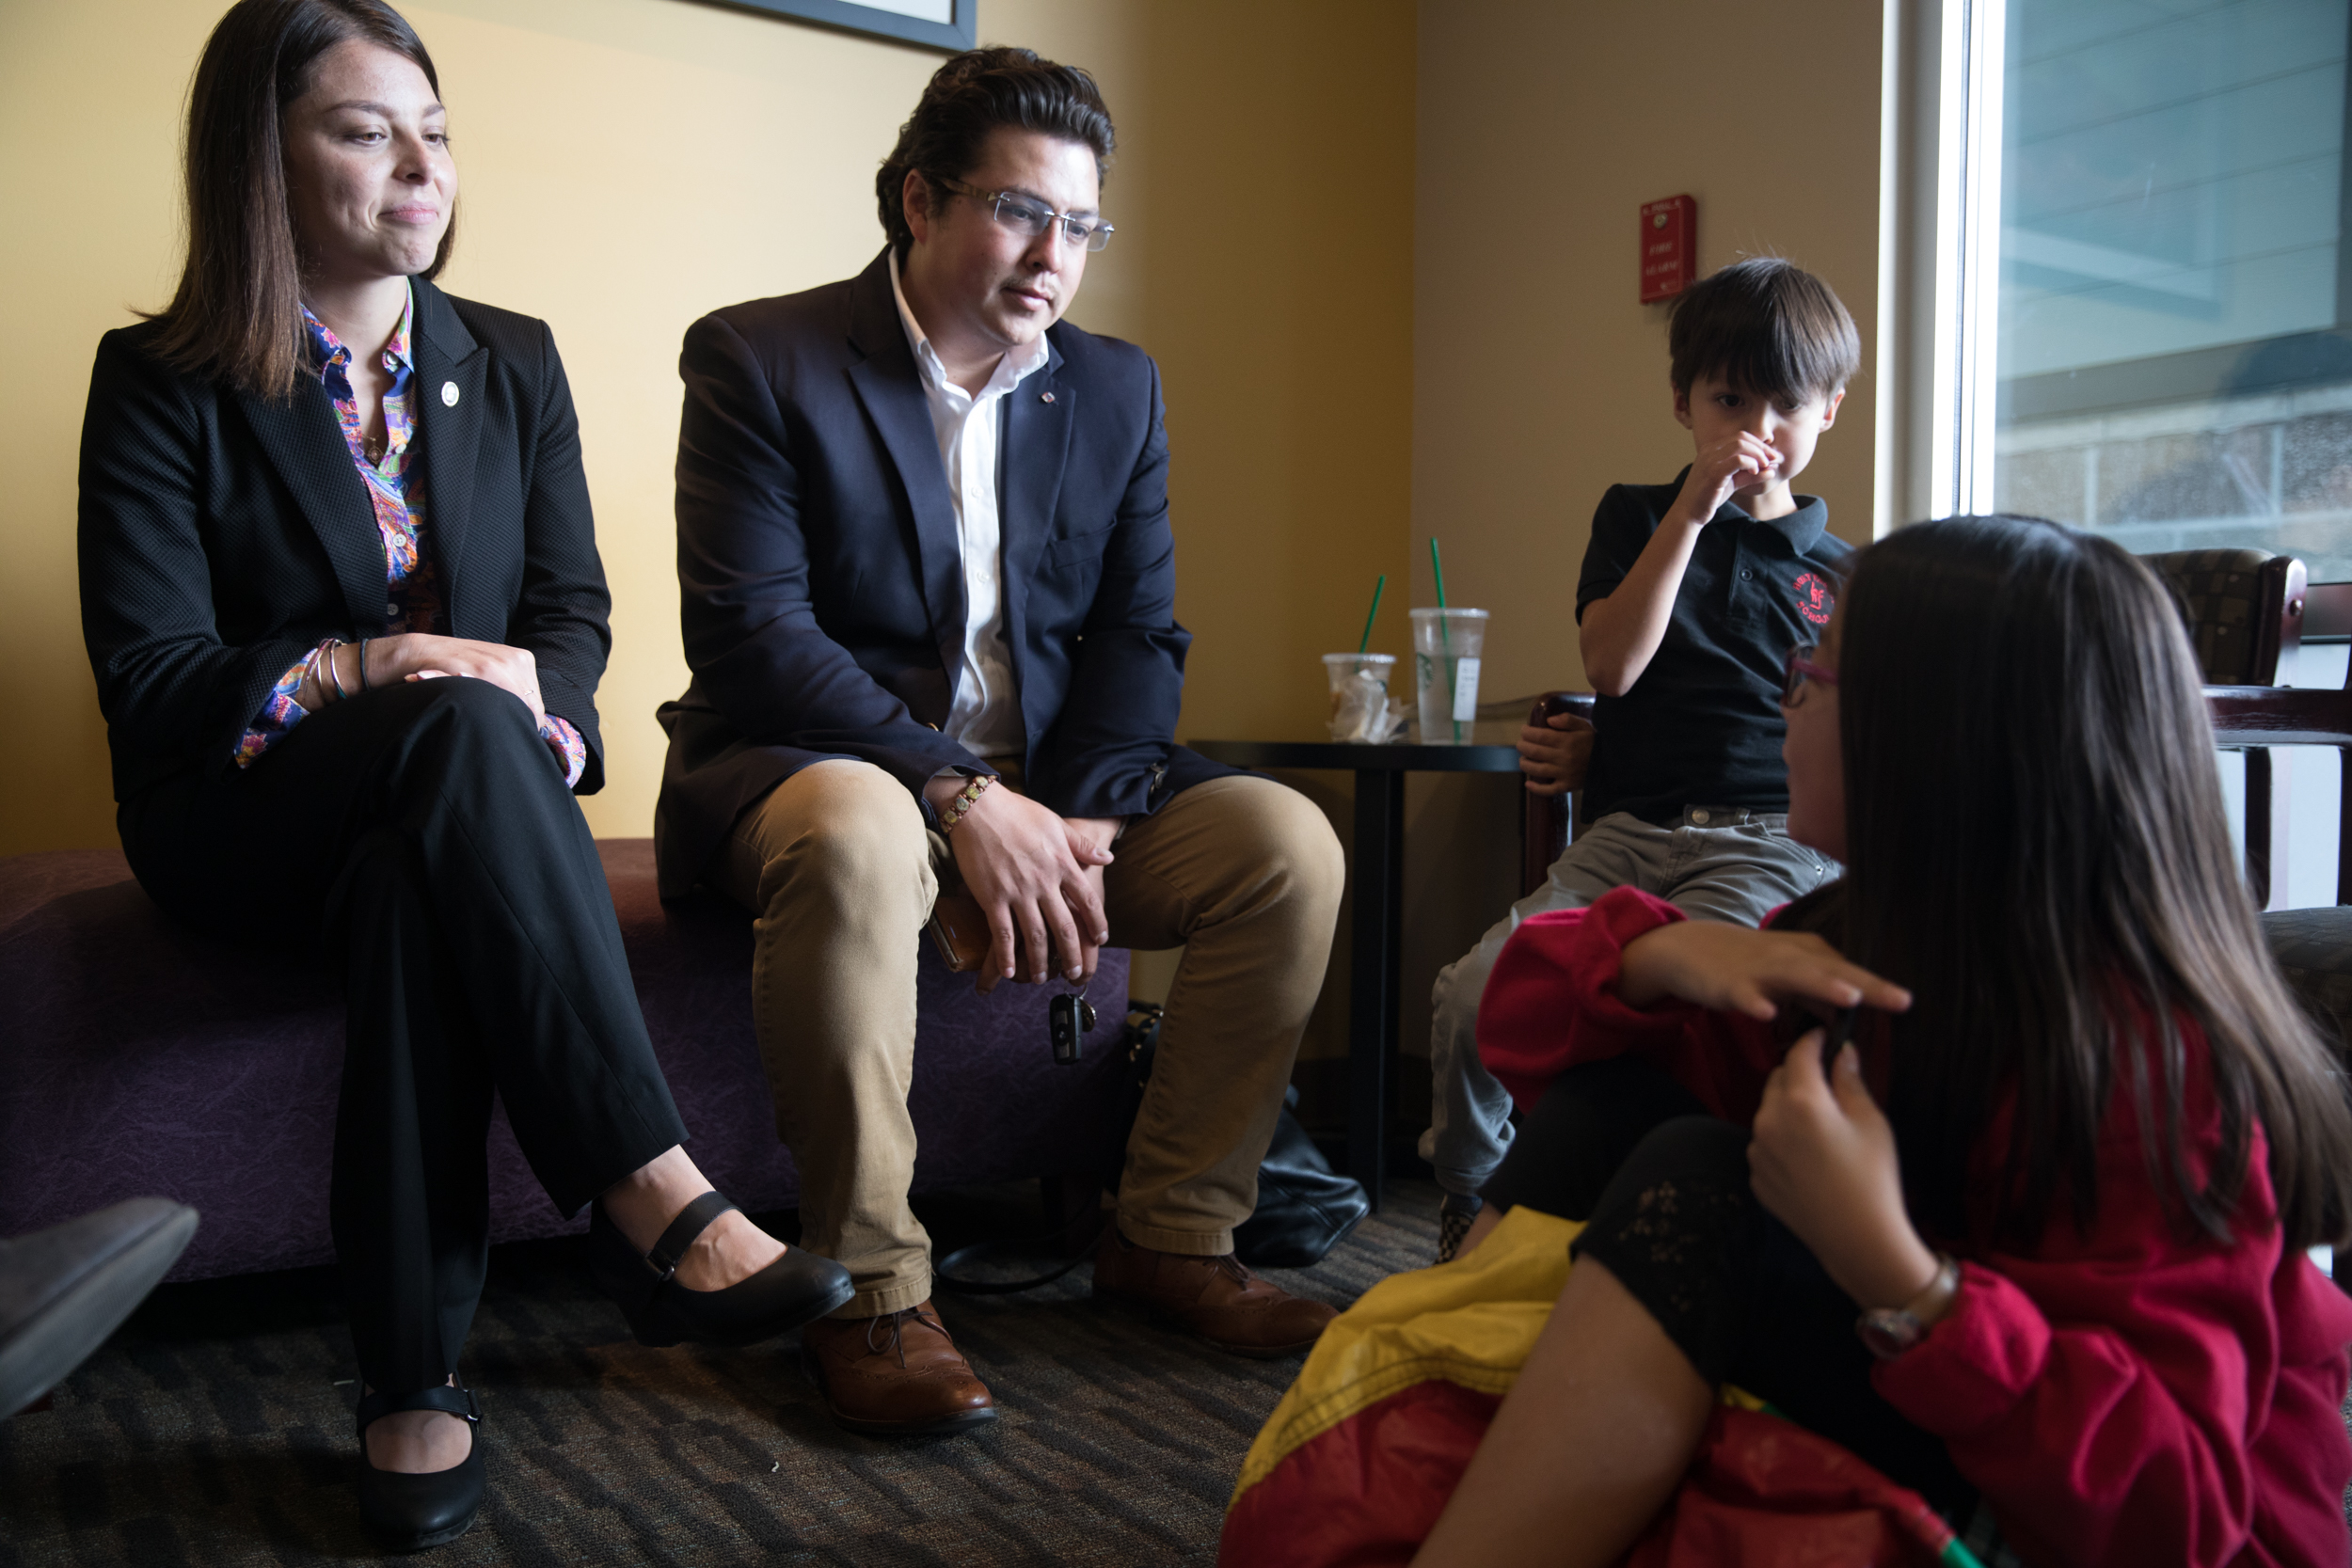 Washington state house of representatives candidate Maia Espinoza stops work on the campaign to take her kids to the dentist office in Dupont, Oct. 4, 2018. (Photo by Matt M. McKnight/Crosscut) 